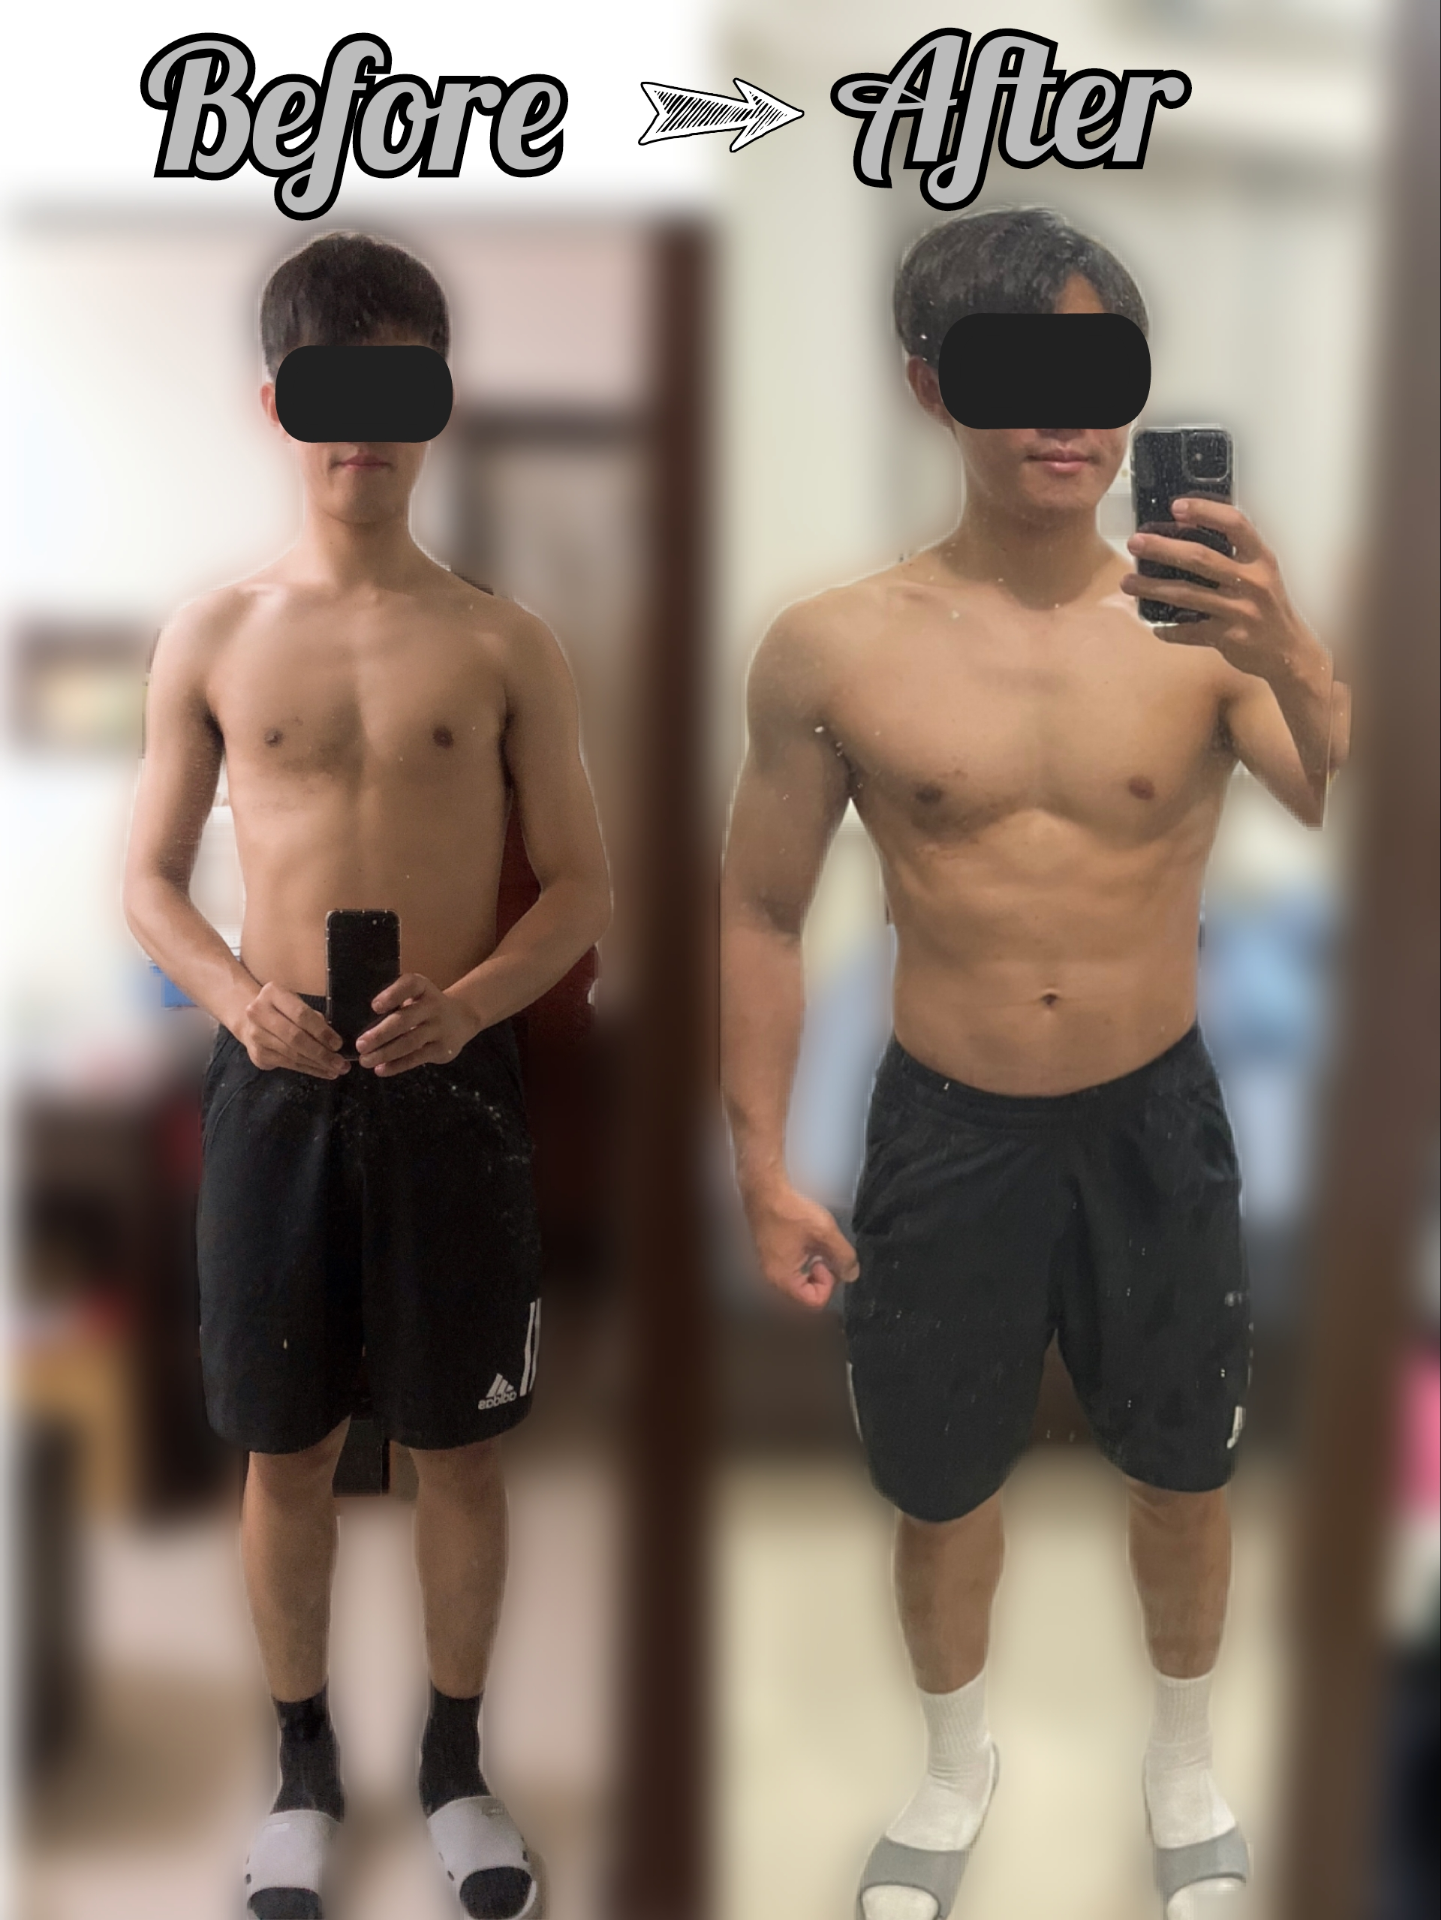 My client's one year body transformation 62kg - 70kg. He put on some muscles especially in his arms. 我的客戶一年的身體改造 62 公斤 - 70 公斤。 他增加了一些肌肉，尤其是在他的手臂上。